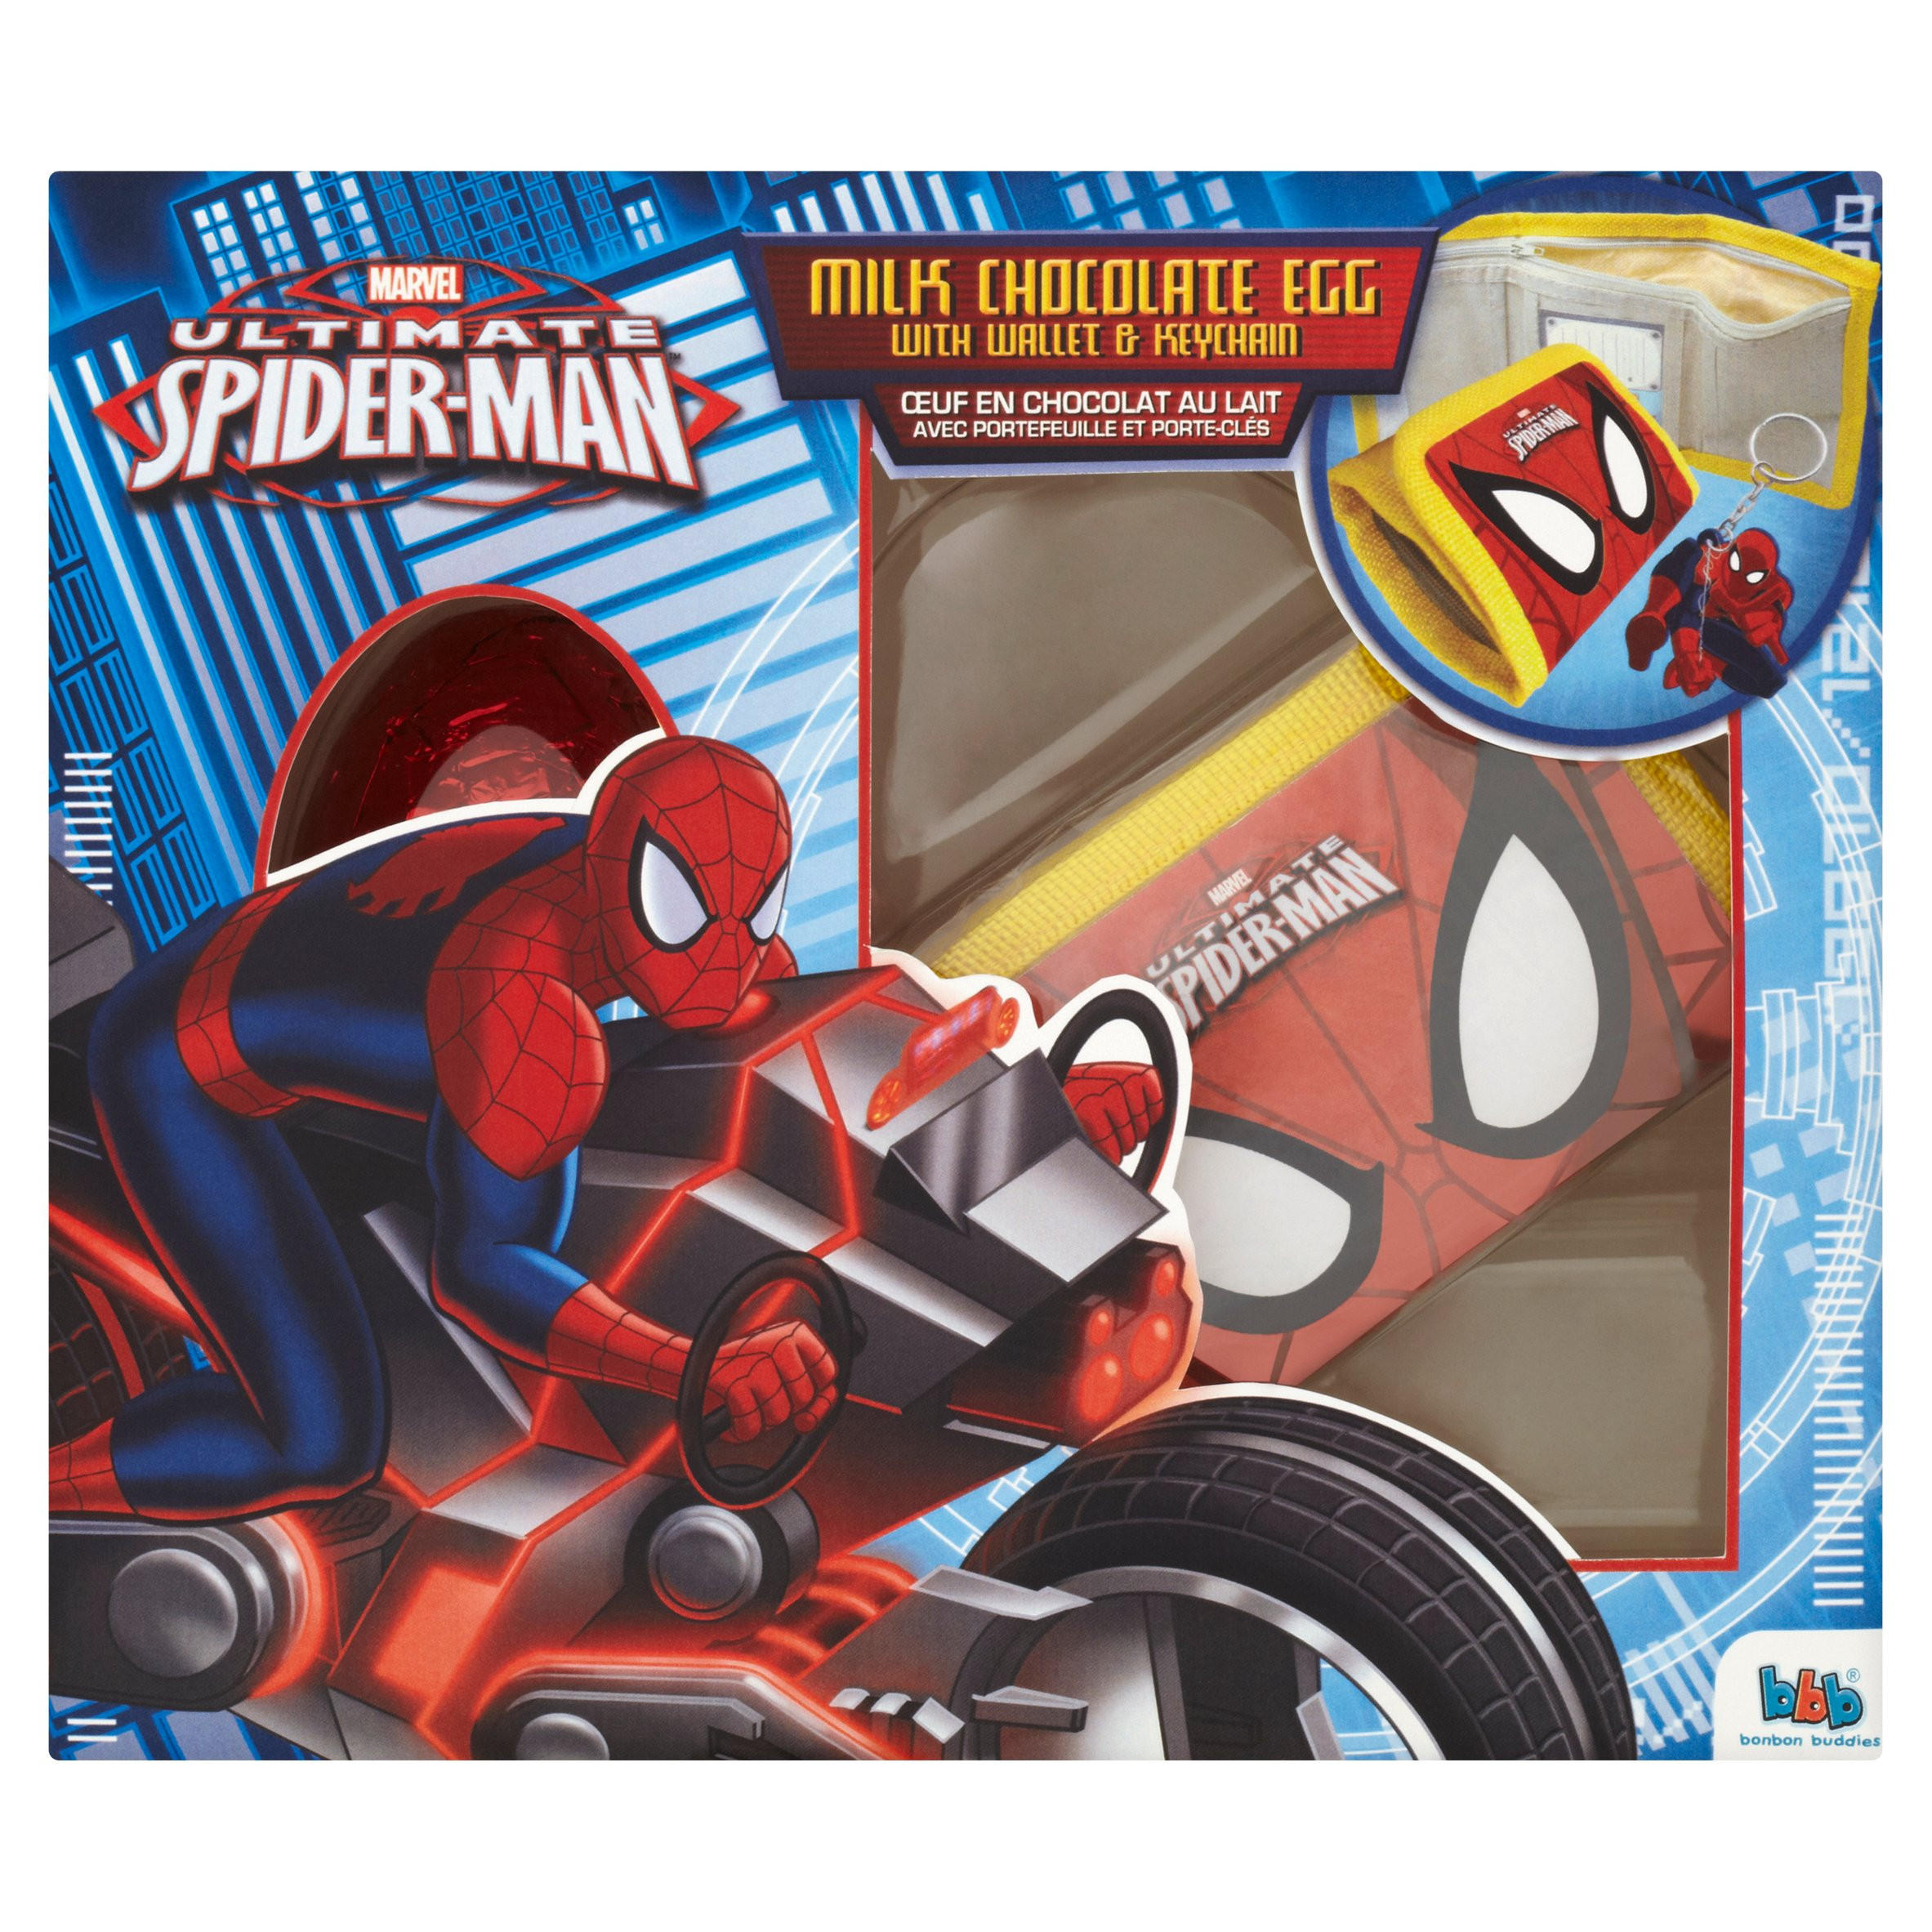 Marvel Ultimate Spiderman Milk Chocolate Egg with Wallet & Keychain 55g |  Iceland Foods